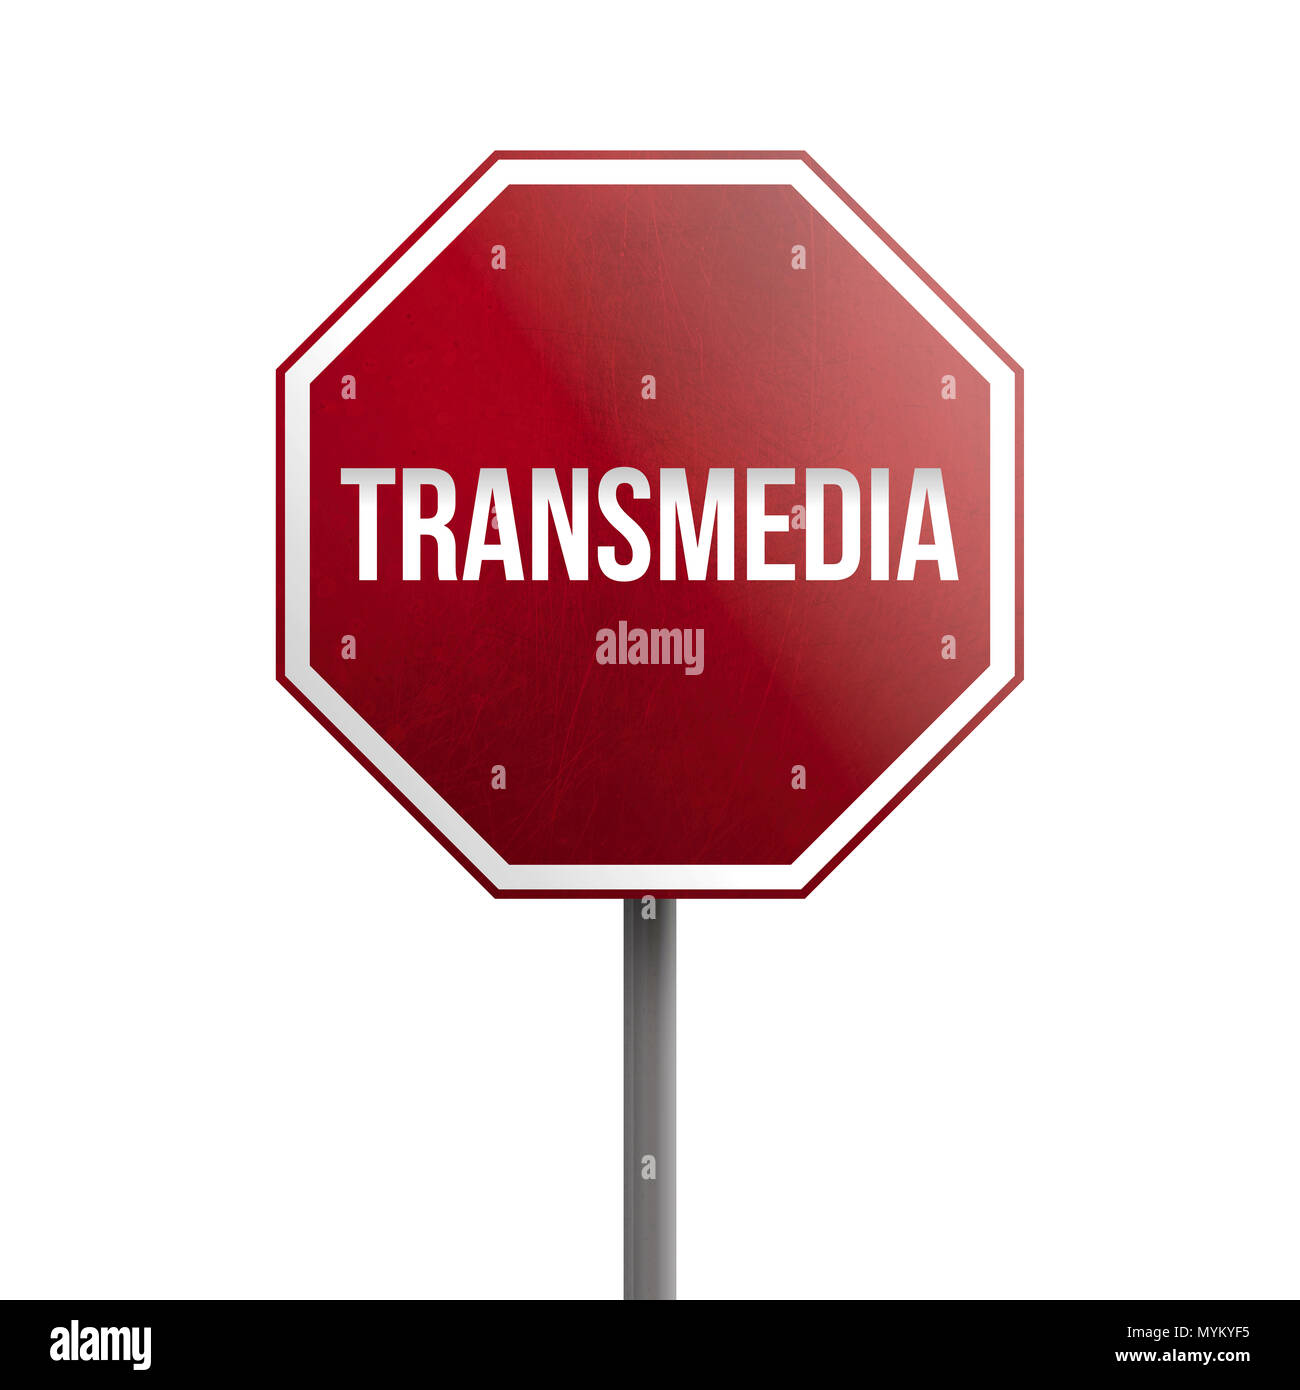 Transmedia - red sign isolated on white background Stock Photo